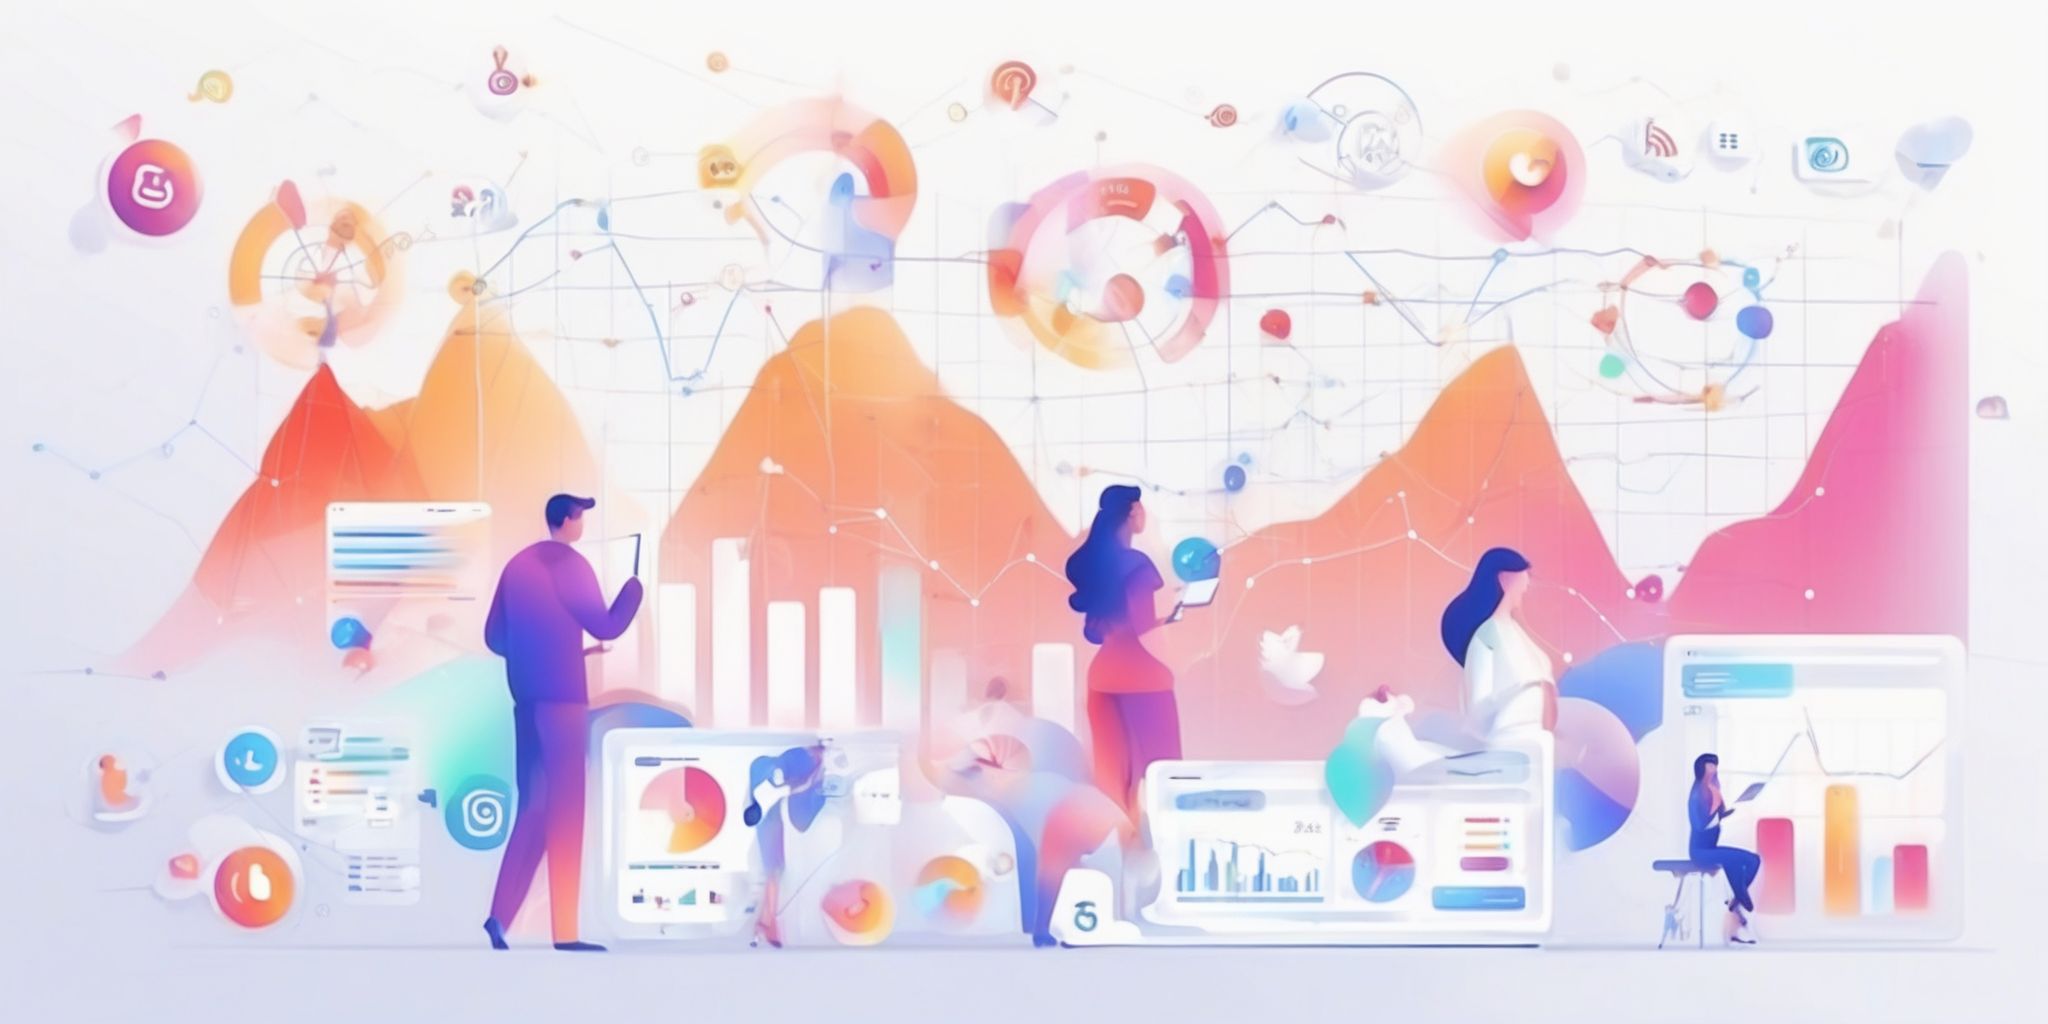 Social media analytics in illustration style with gradients and white background